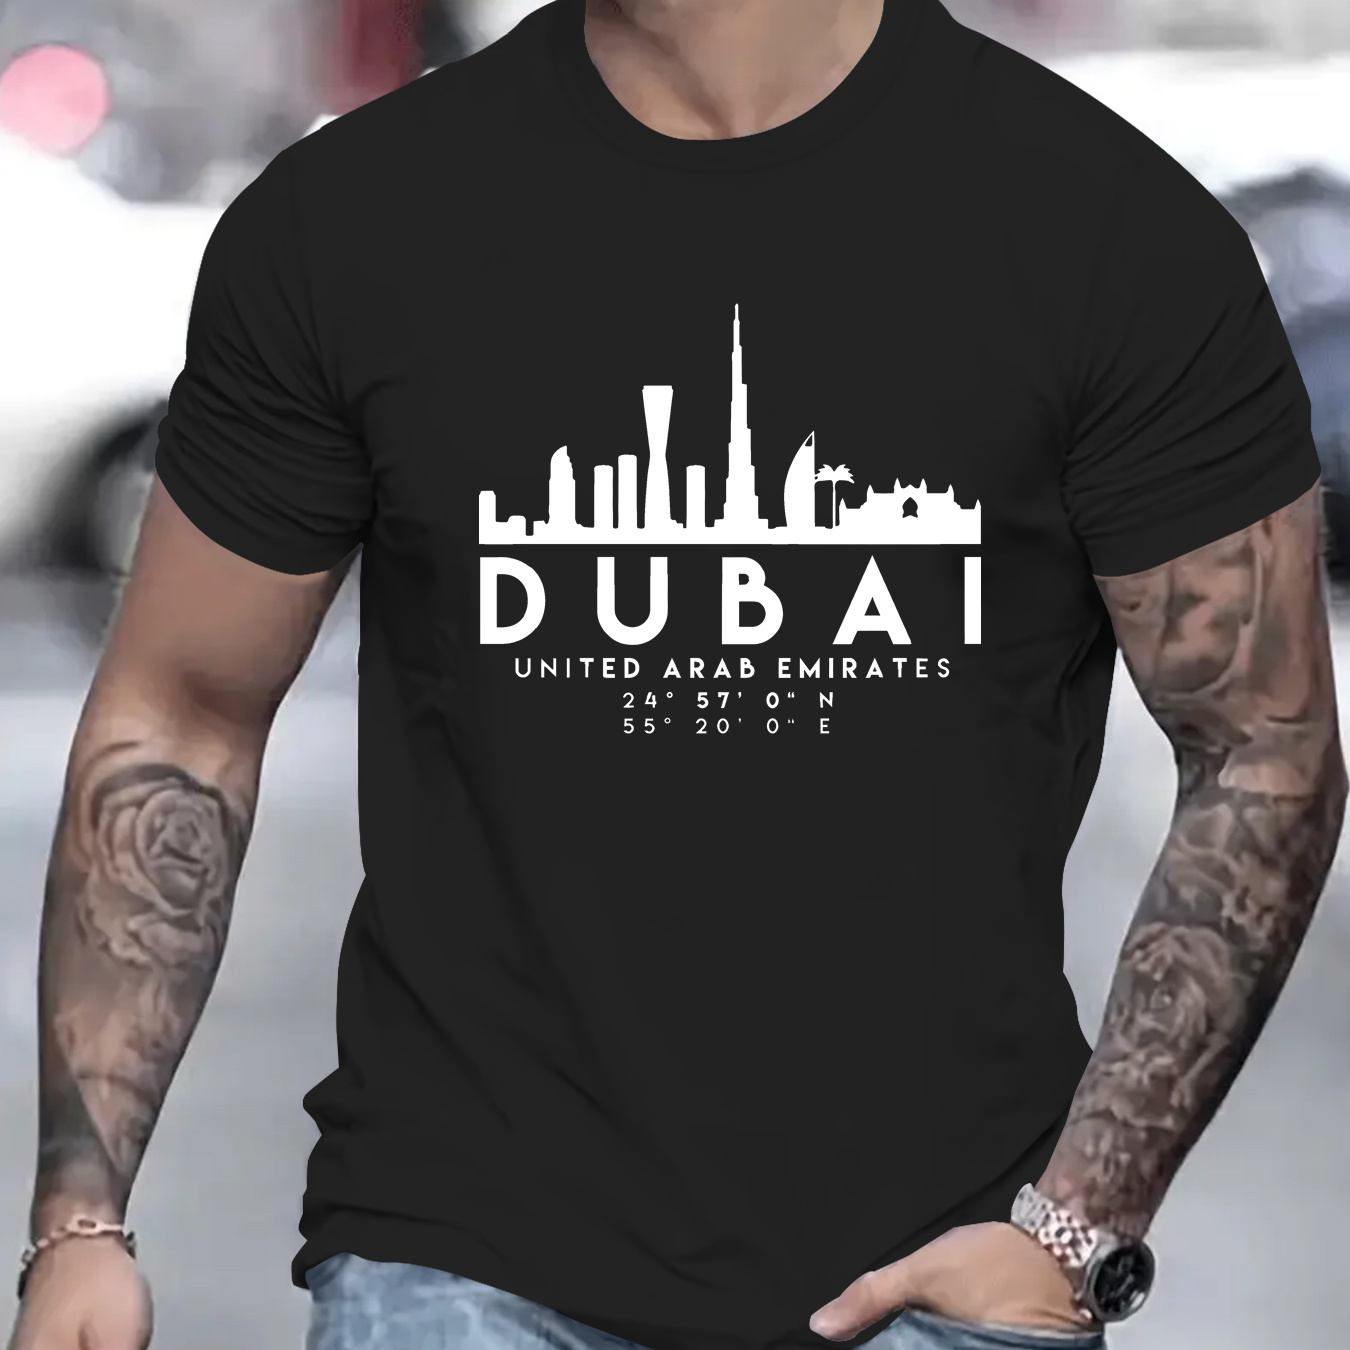 

Dubai Themed Graphic Print Crew Neck Short Sleeve T-shirt For Men, Casual Summer T-shirt For Daily Wear And Vacation Resorts